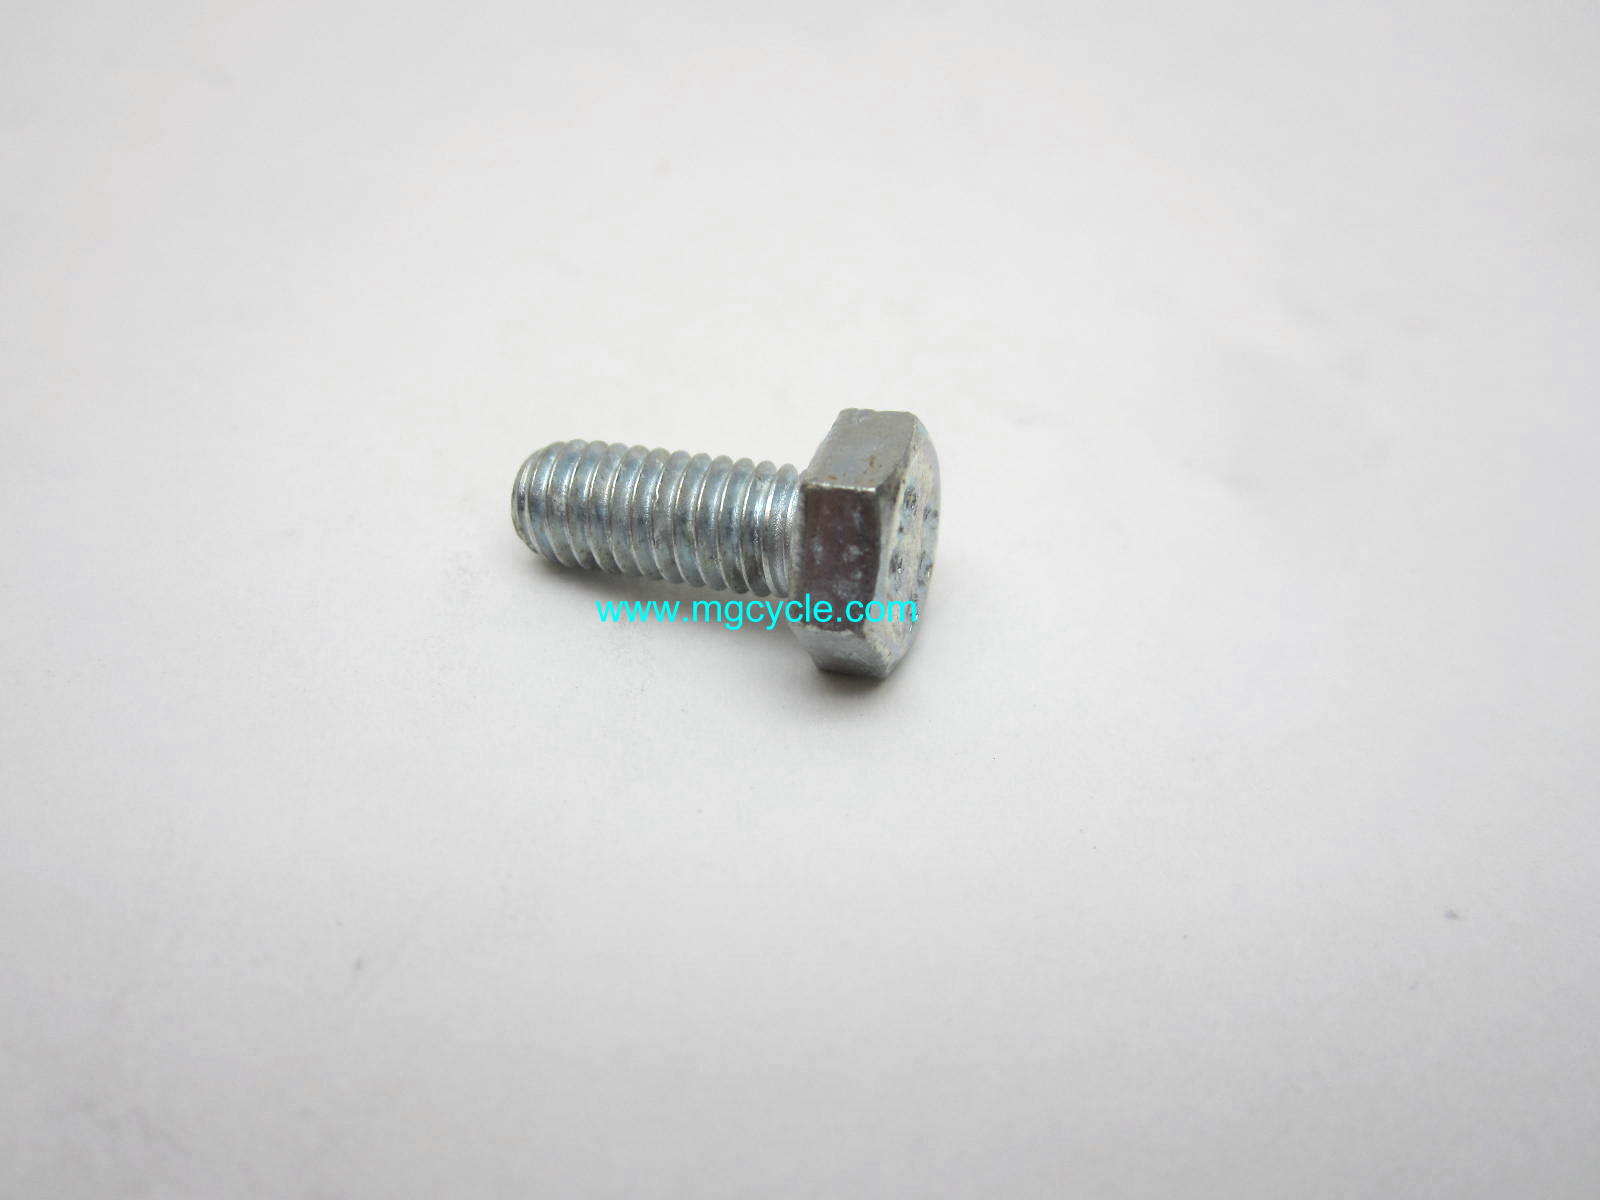 M6 hex head 14mm long rocker spindle retaining, round heads